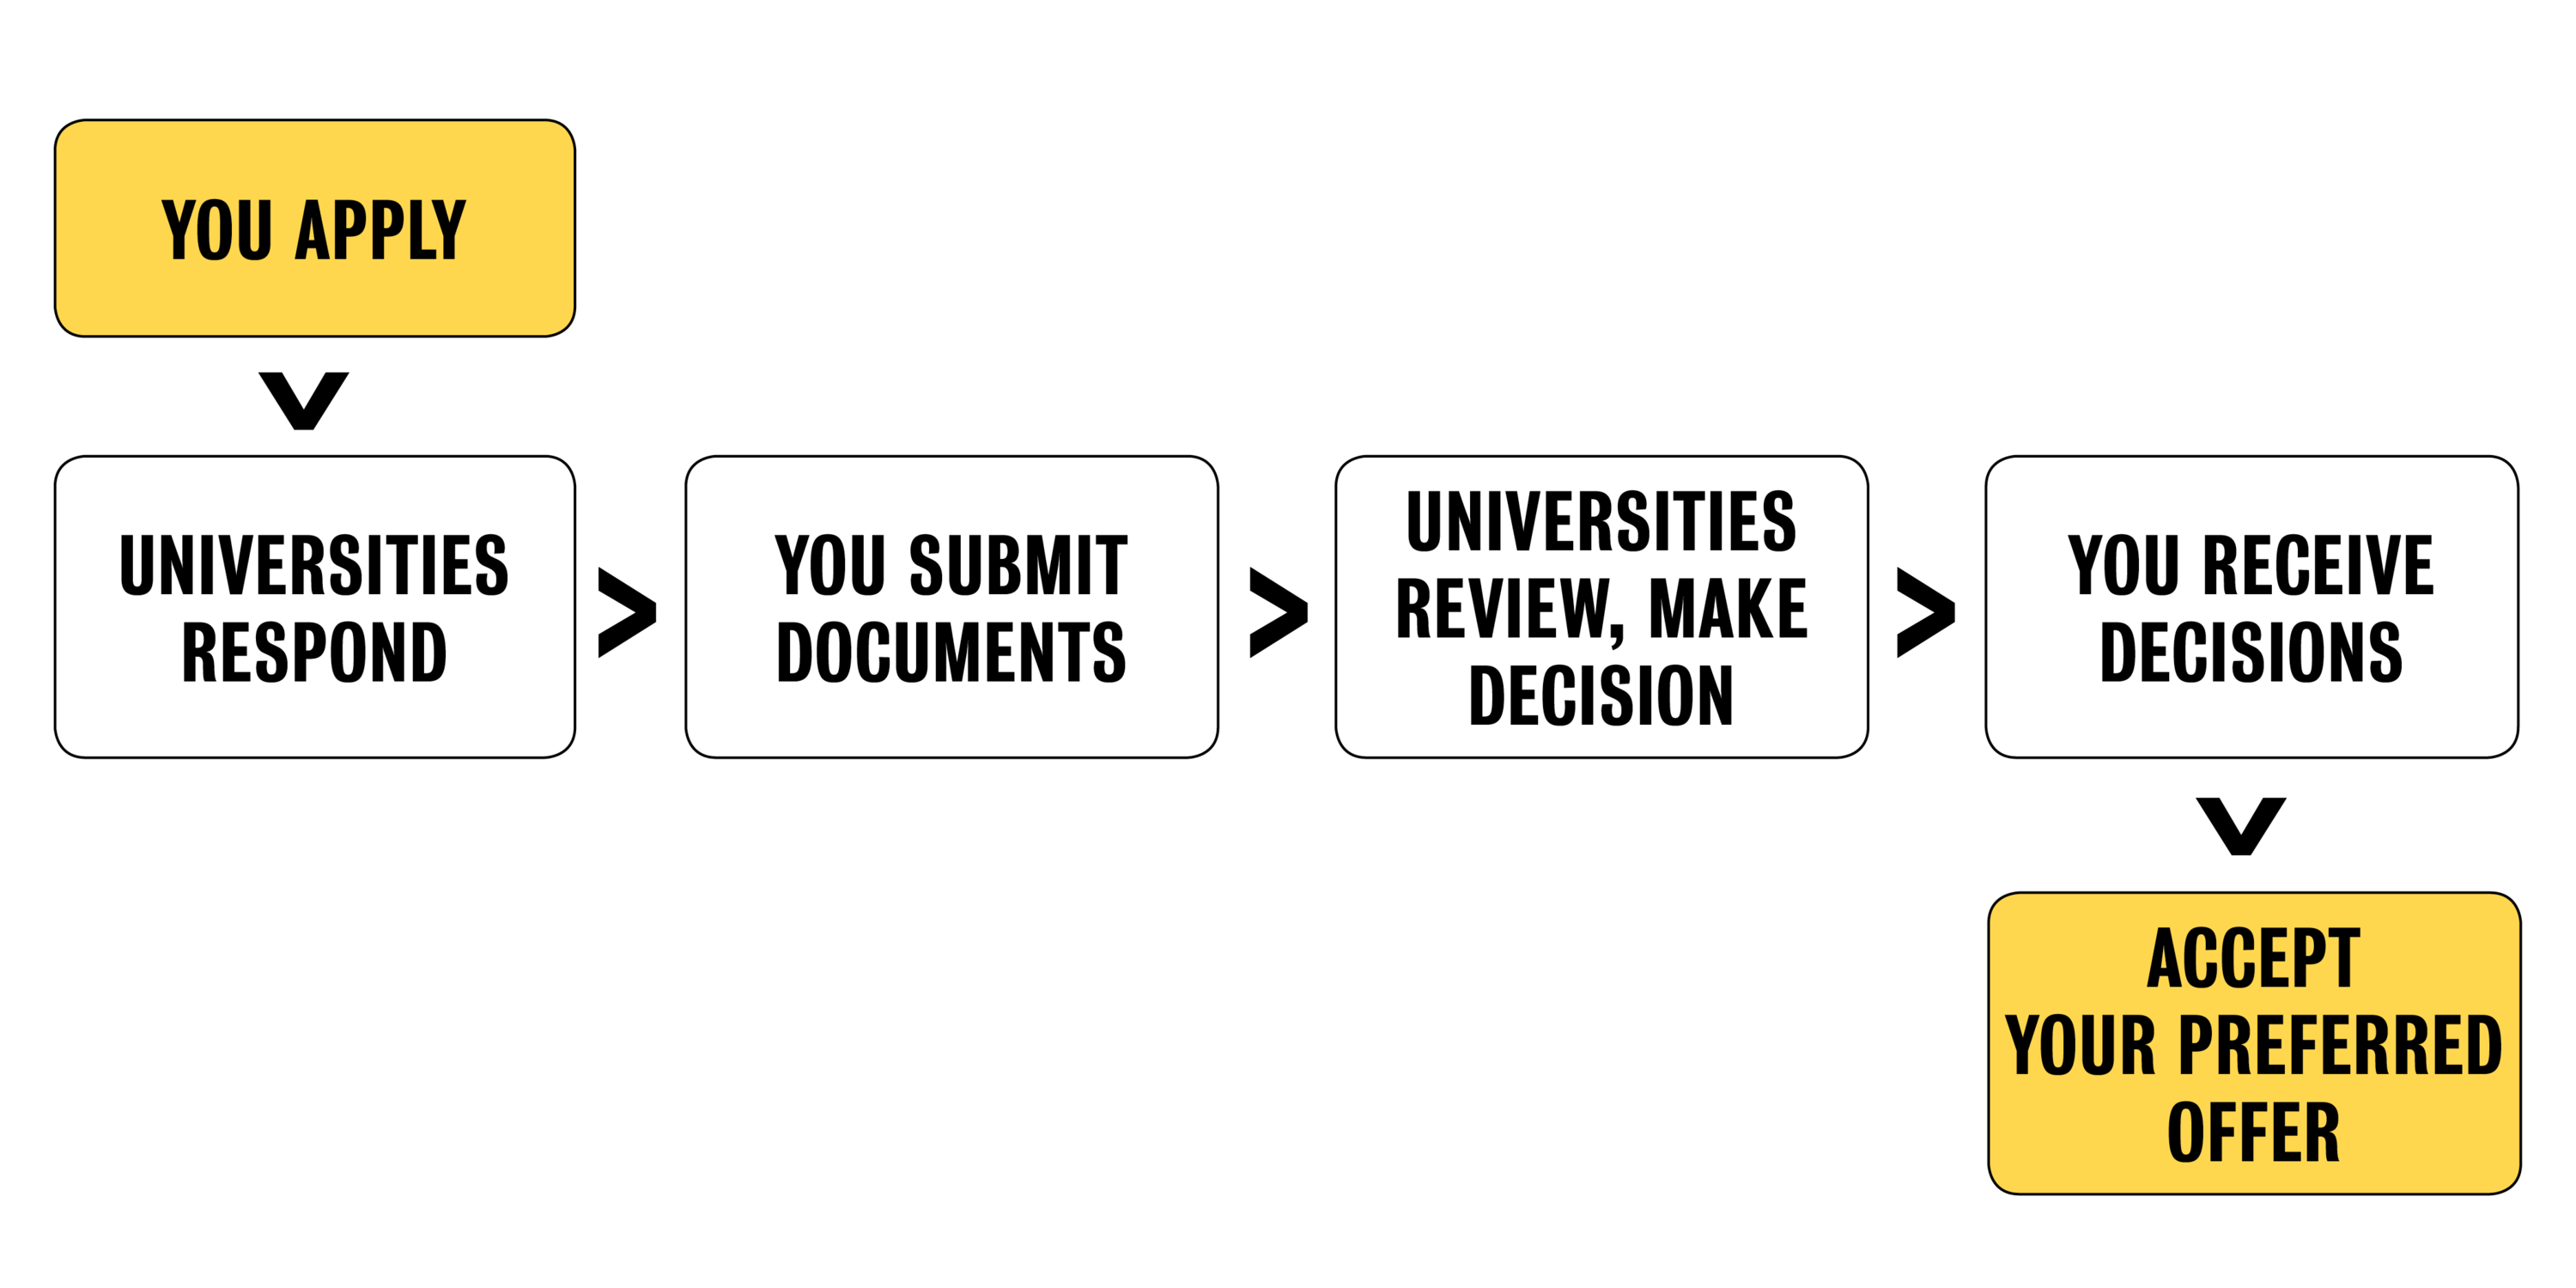  Apply, universities respond, you submit documents, universities review applications, you receive decisions, accept your preferred offer